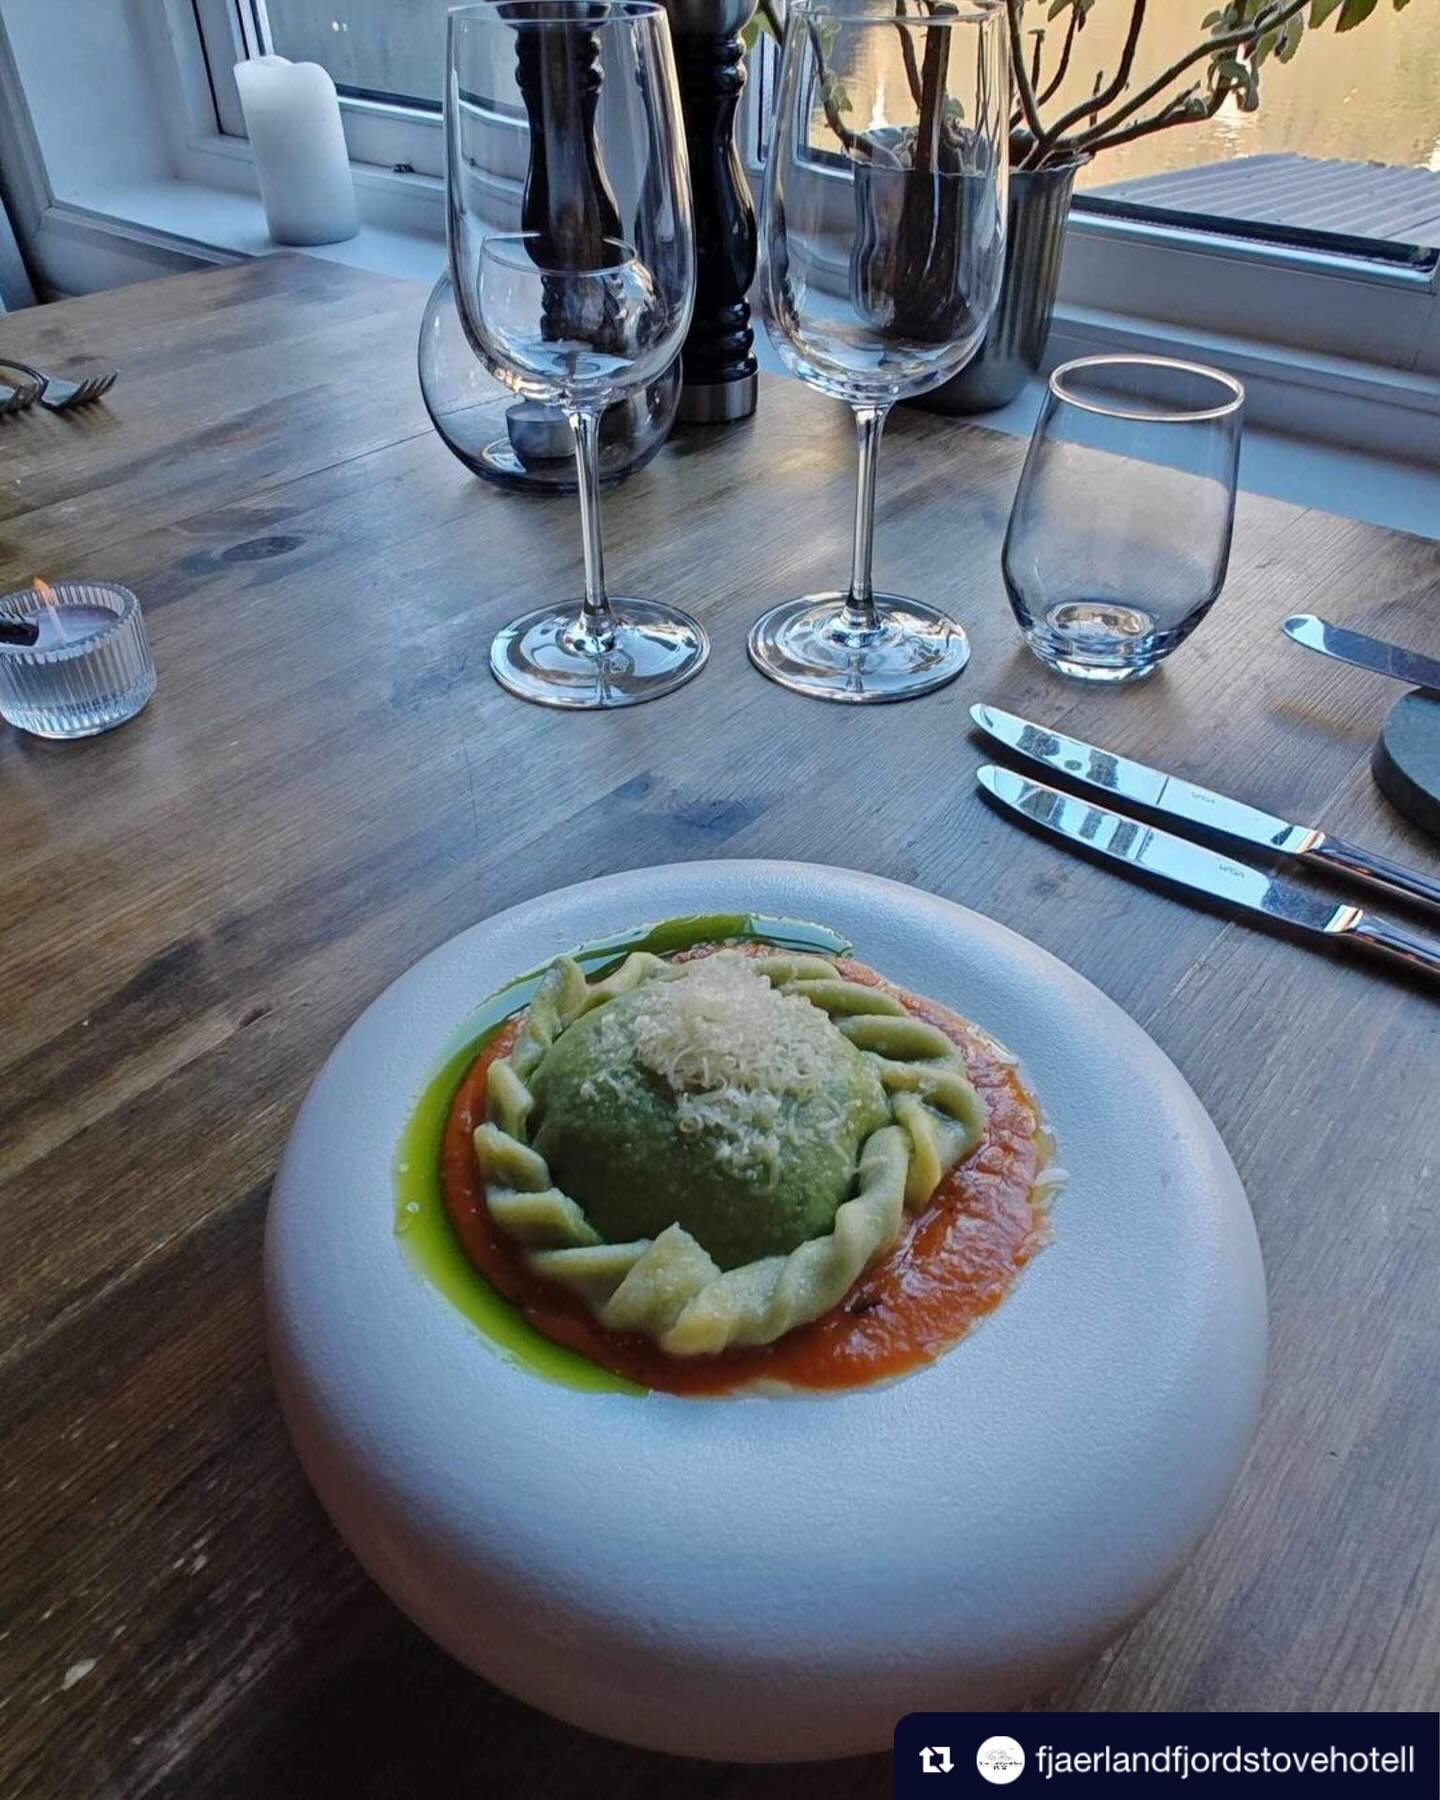 Repost from @fjaerlandfjordstovehotell
&bull;
After the storytelling about Fj&aelig;rland and our hotel, you can enjoy a delicious three-course dinner 🍽

#wildgarlic #raviolo
#pollock
#chocolate #chocolatefondant

📸 @photographingchef

@norskbremus